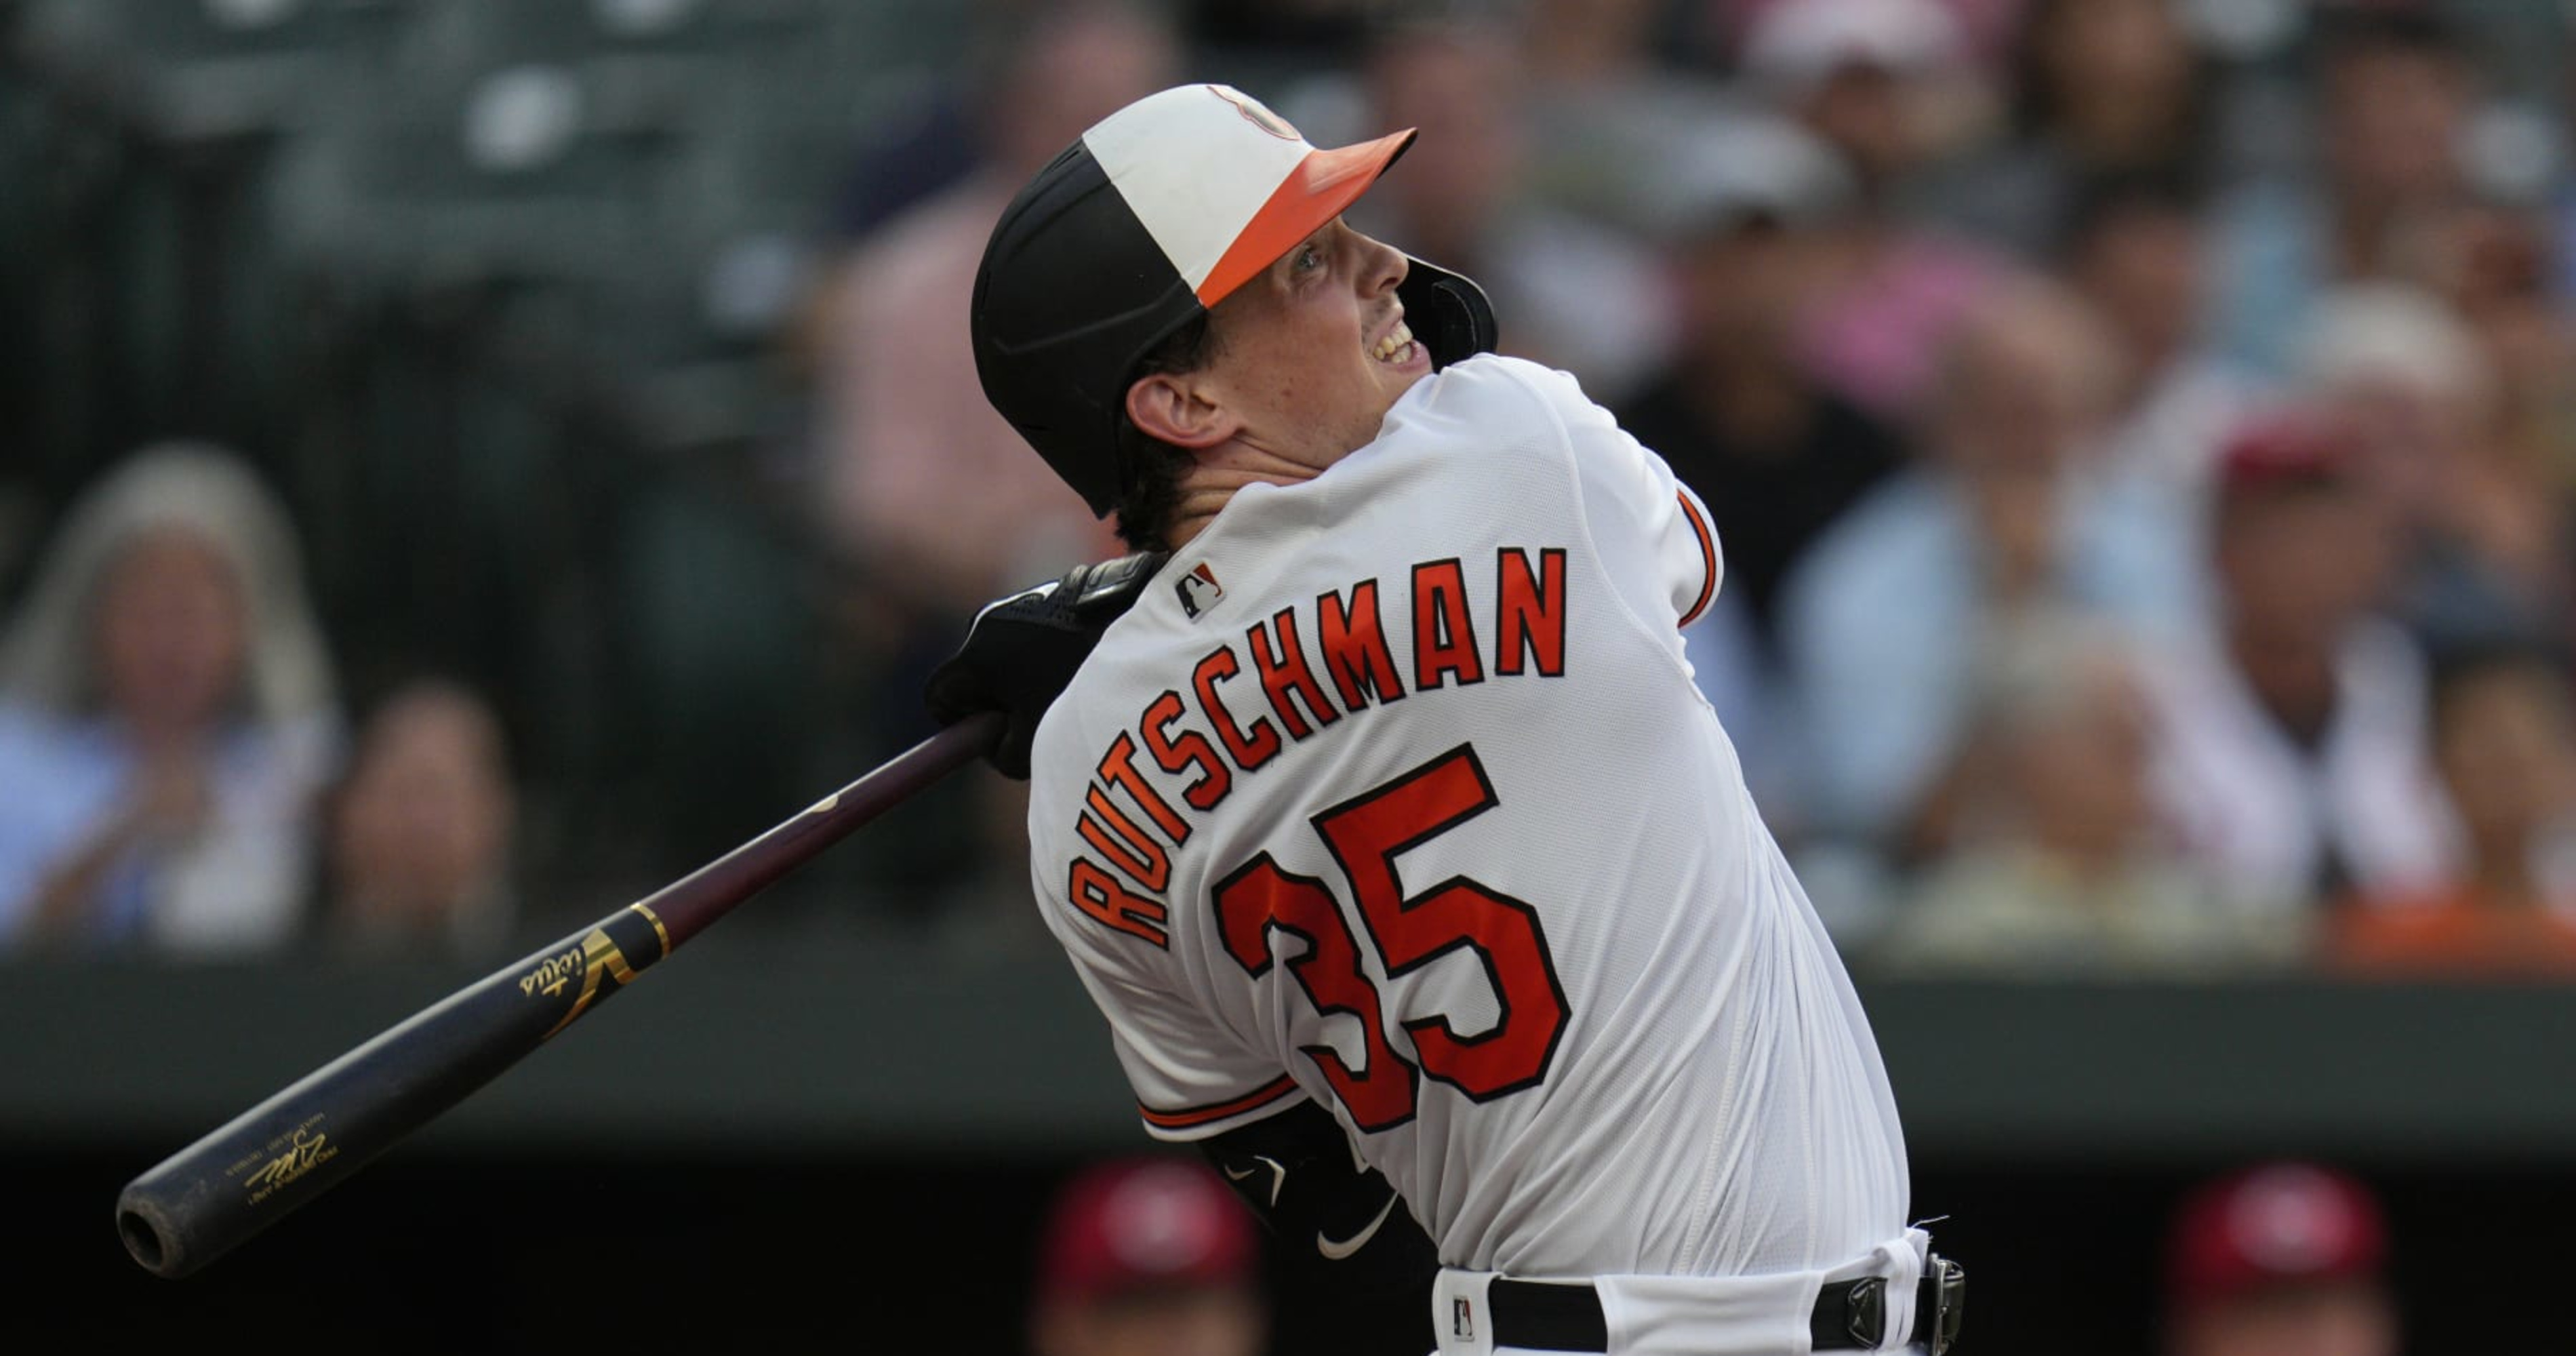 Who is Baltimore Orioles player Adley Rutschman and how old is he